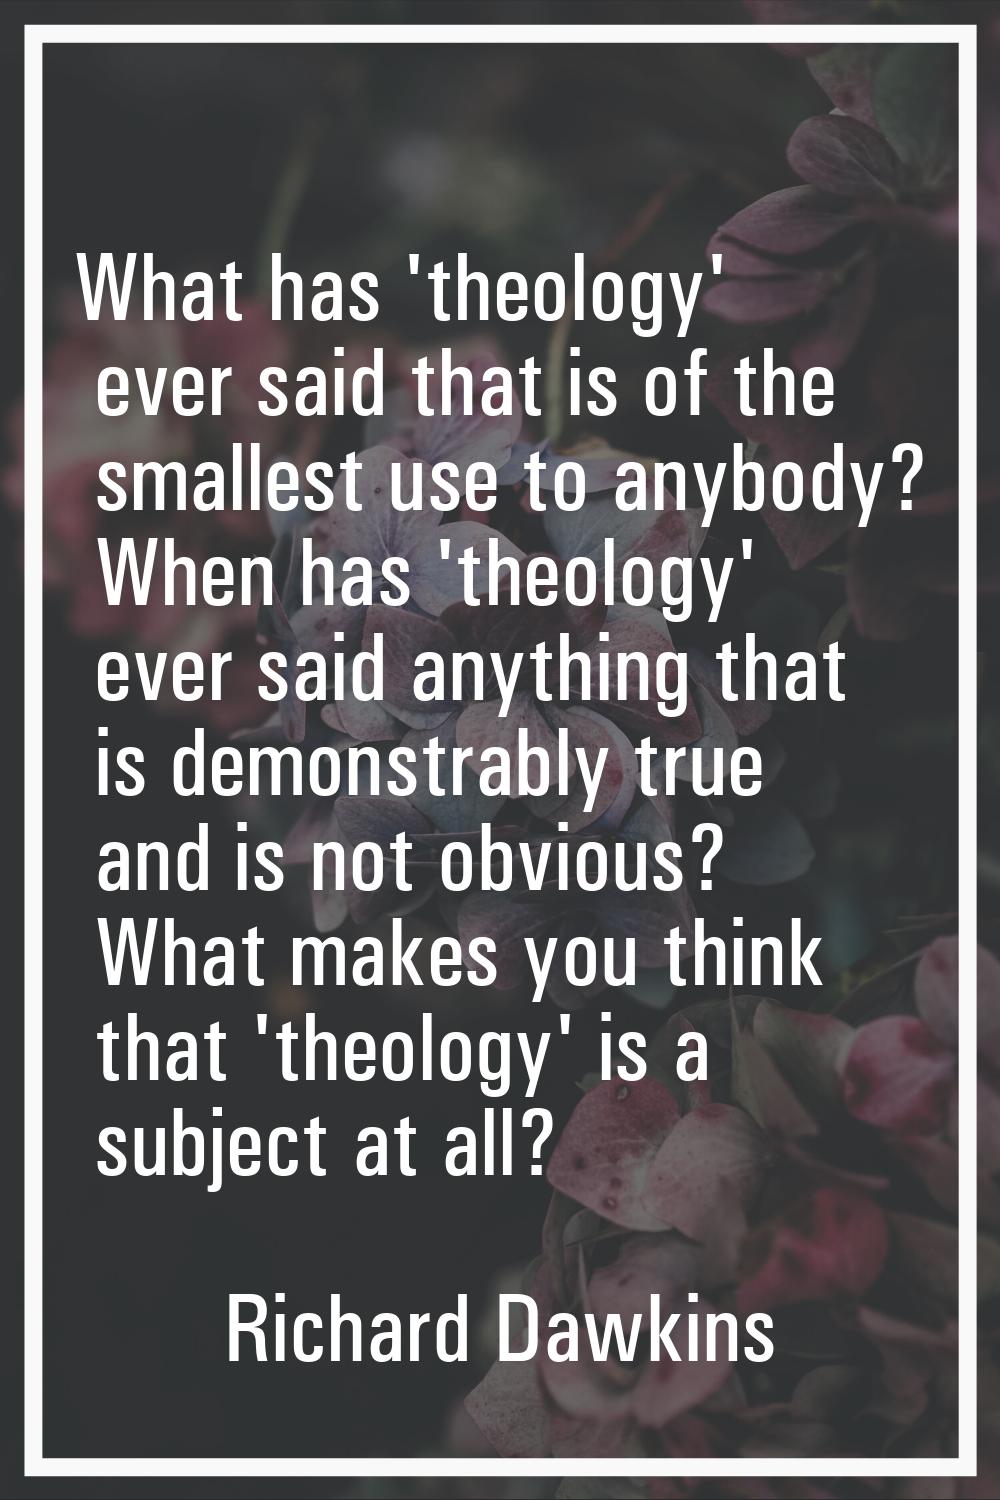 What has 'theology' ever said that is of the smallest use to anybody? When has 'theology' ever said